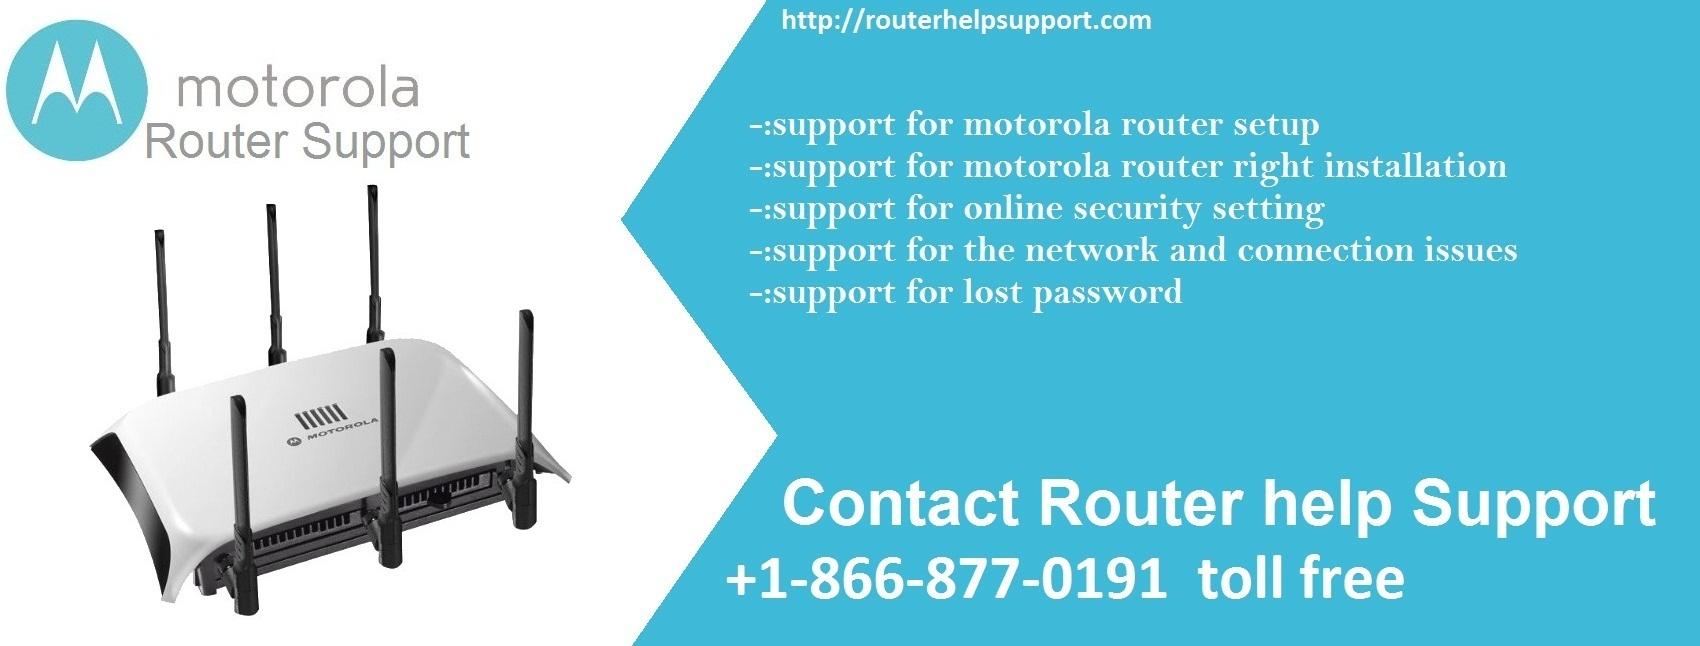 motorola router support by router-help-support